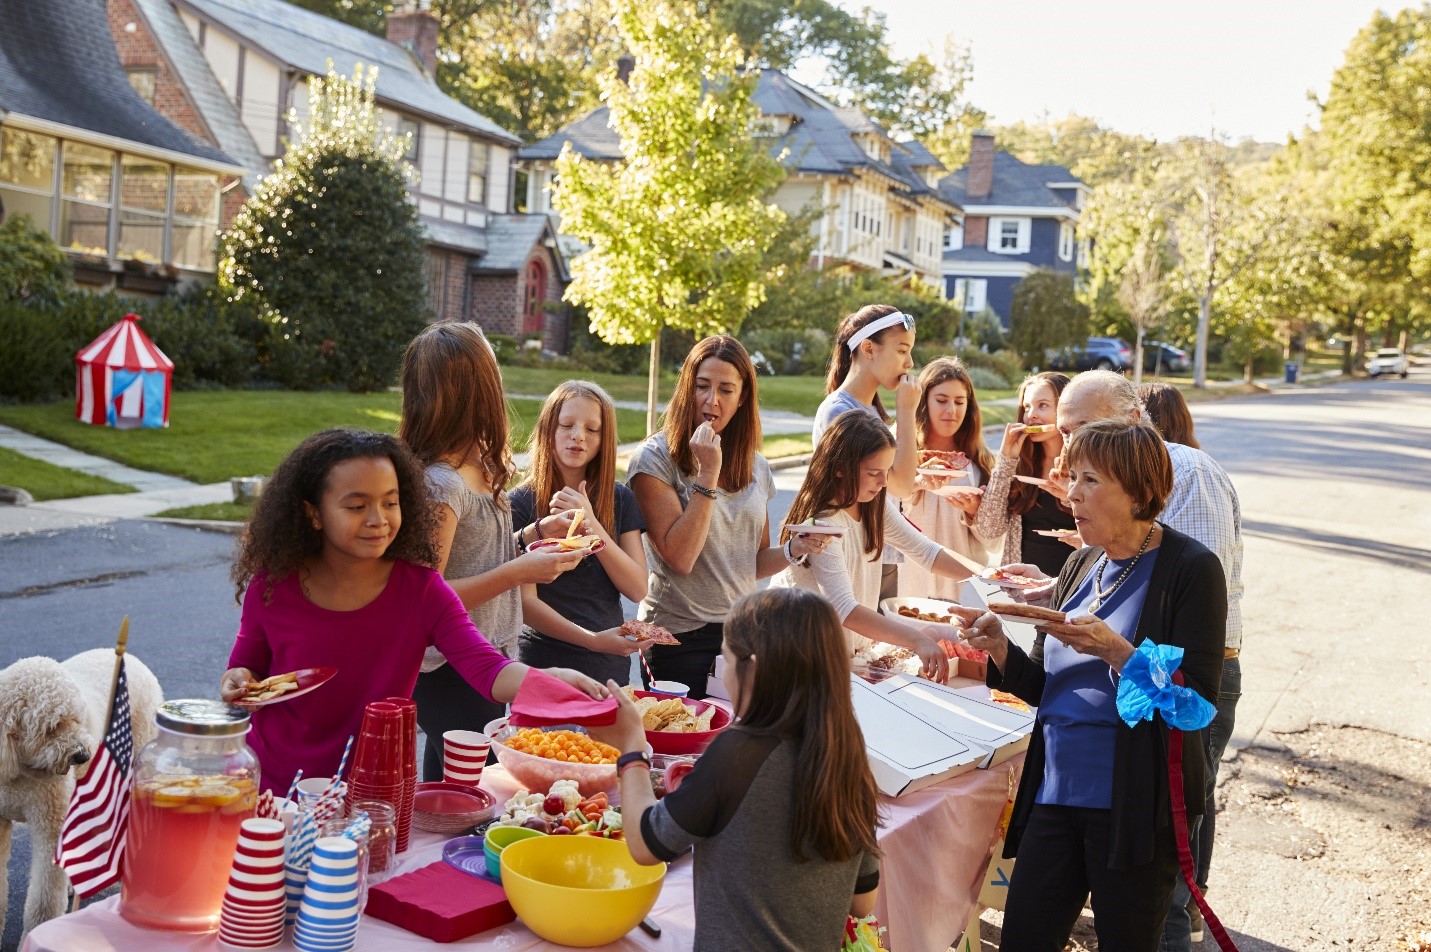 Group of women and girls enjoying food at a block party